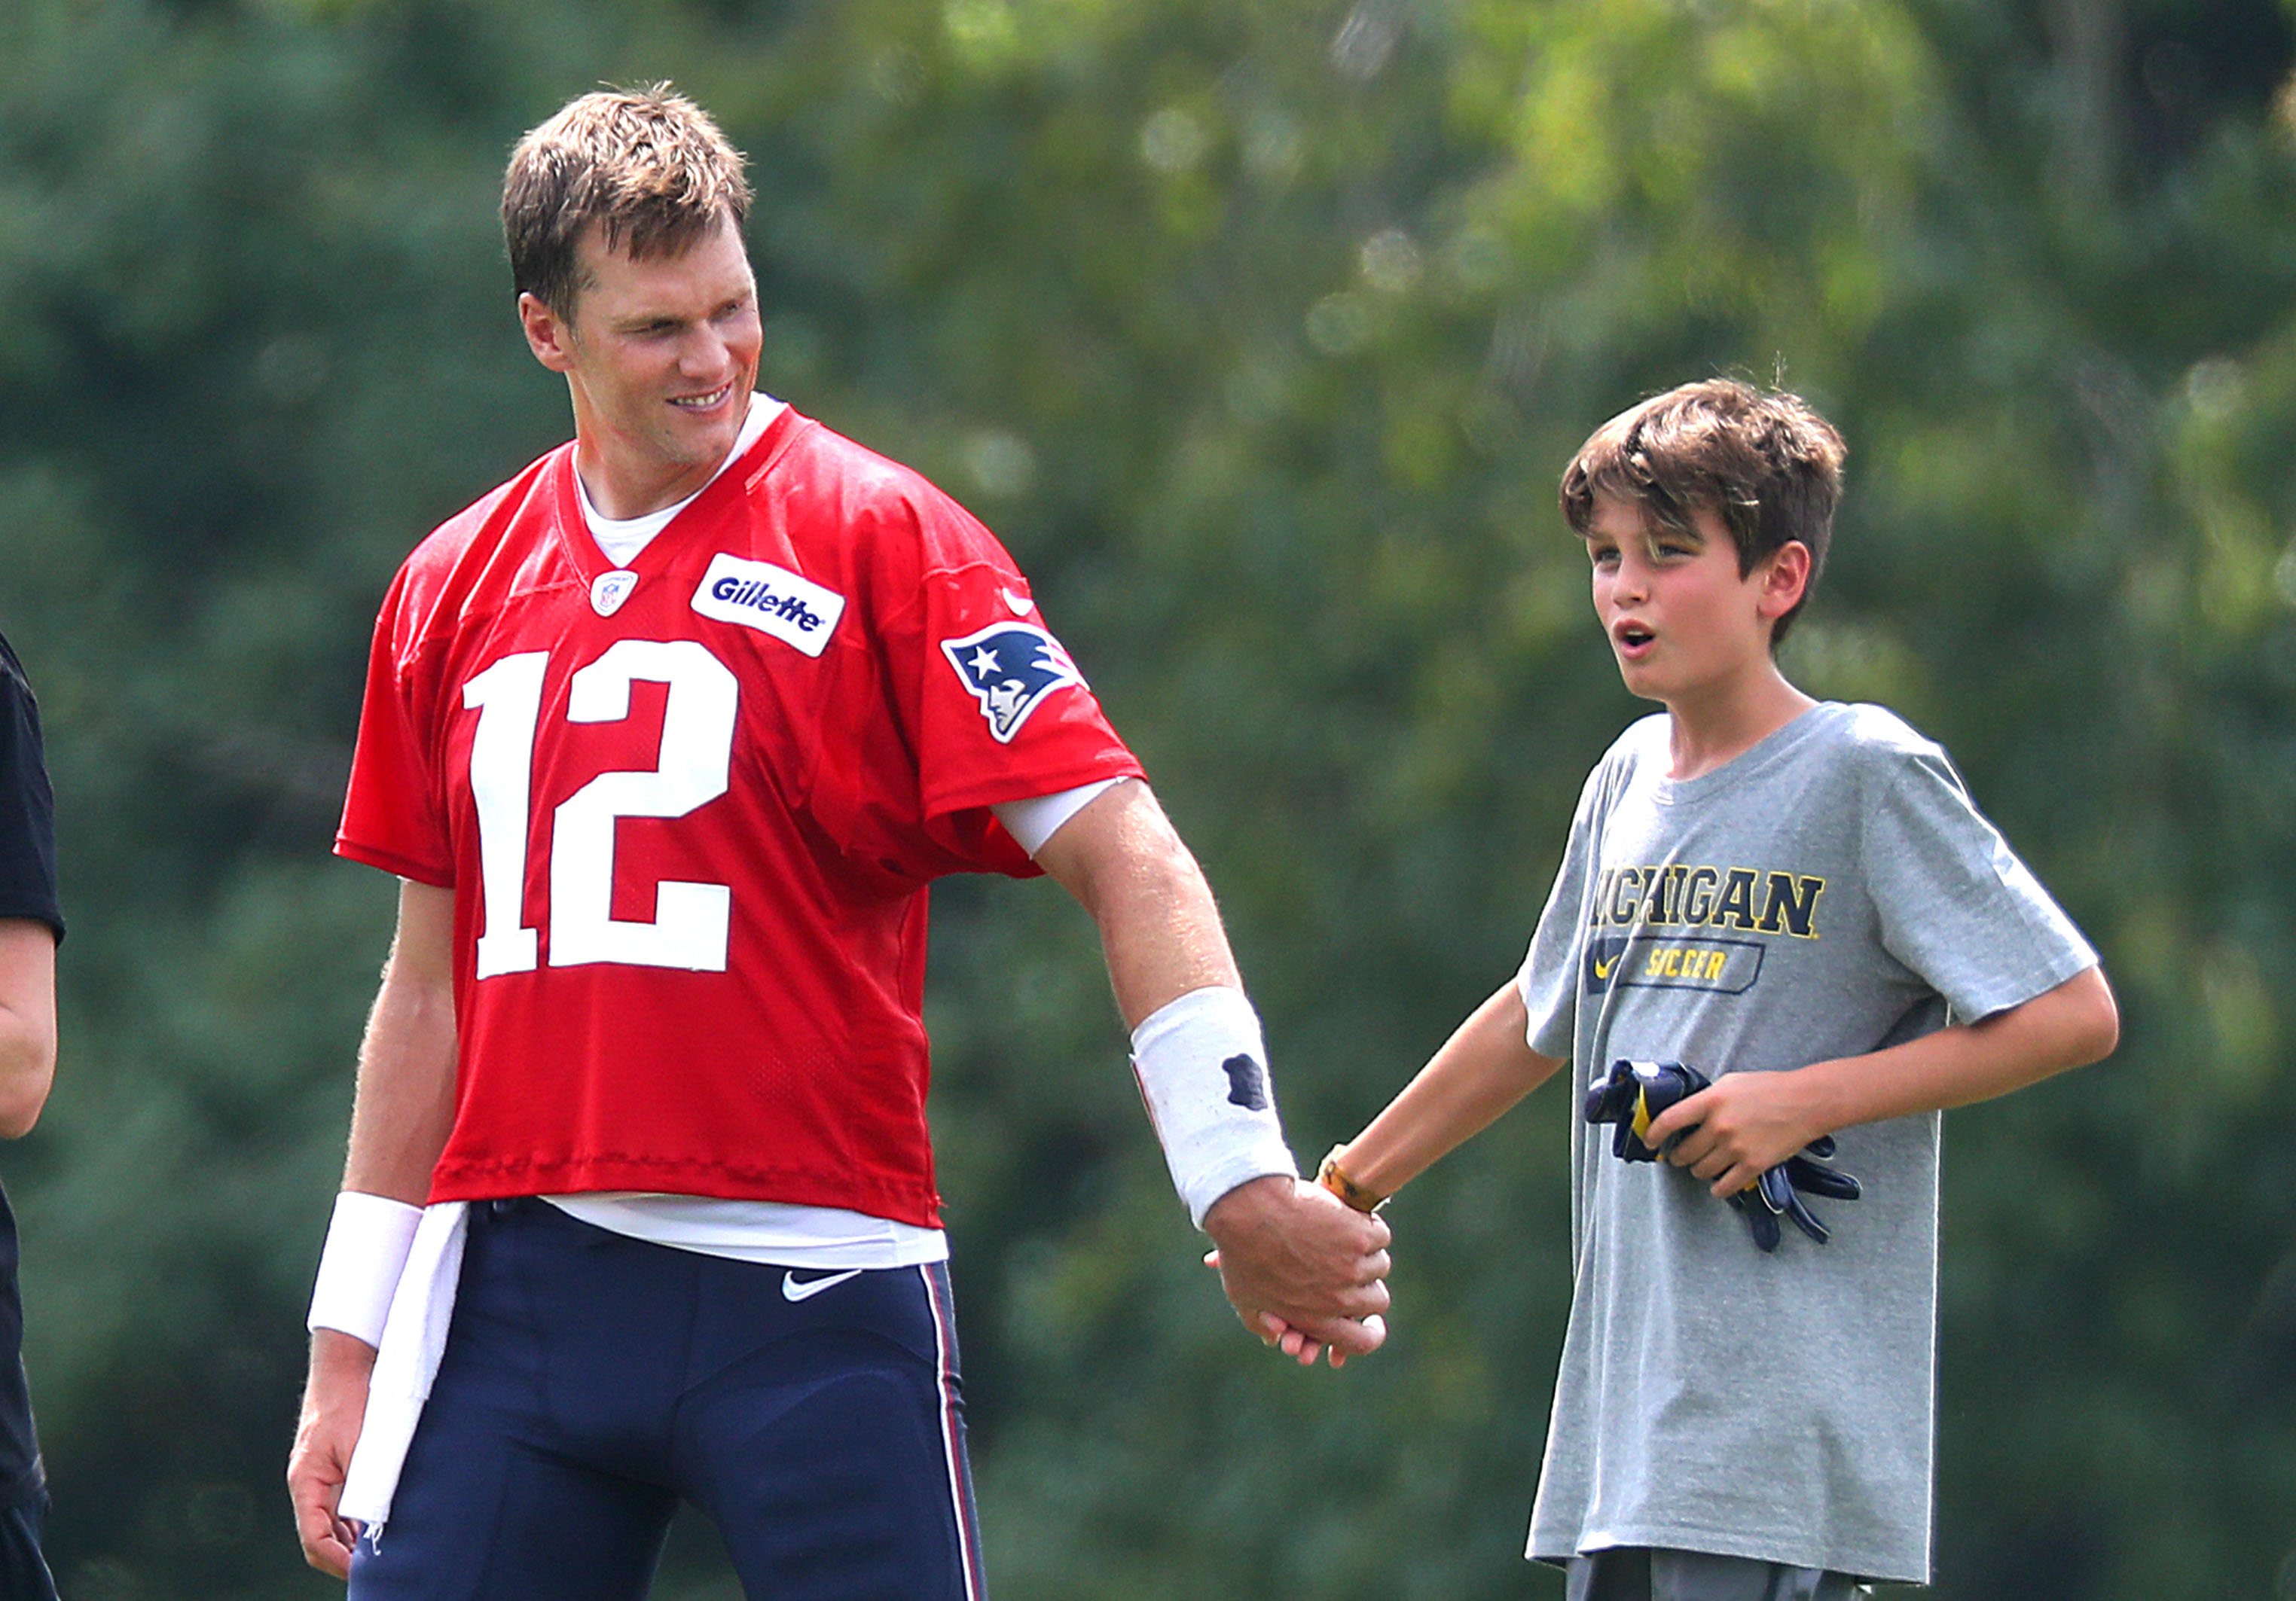 Tom Brady walking off the field with his son, Jack after New England Patriots training camp at the Gillette Stadium practice facility on August 7, 2018 in Foxborough, Massachusetts ┃Source: Getty Images